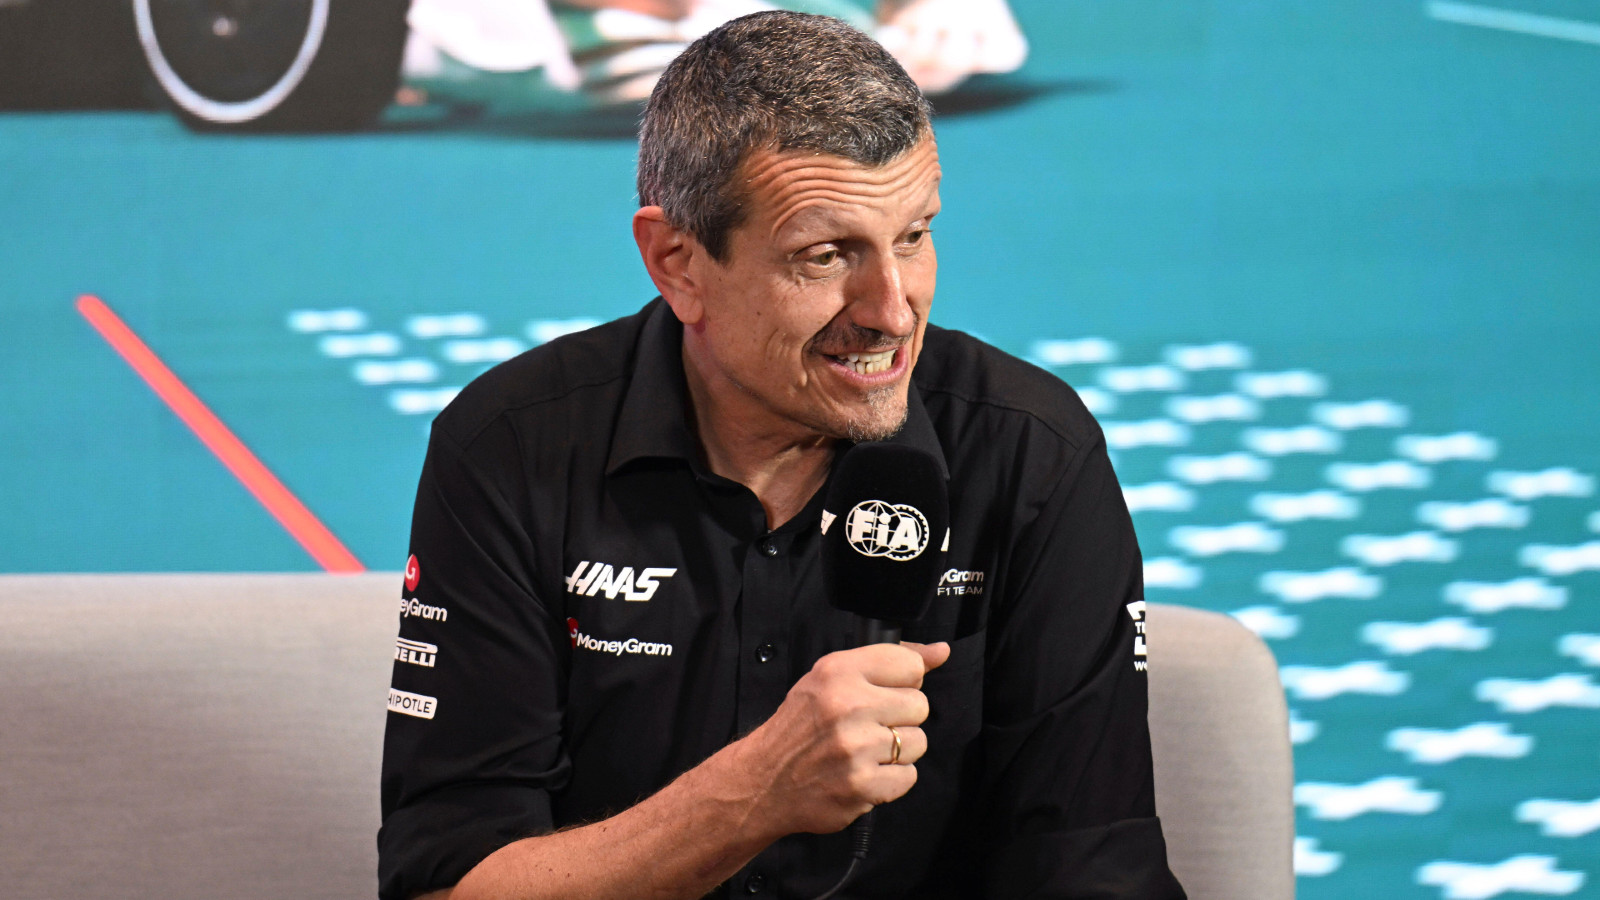 Guenther Steiner issues key update on four driver spots ahead of F1